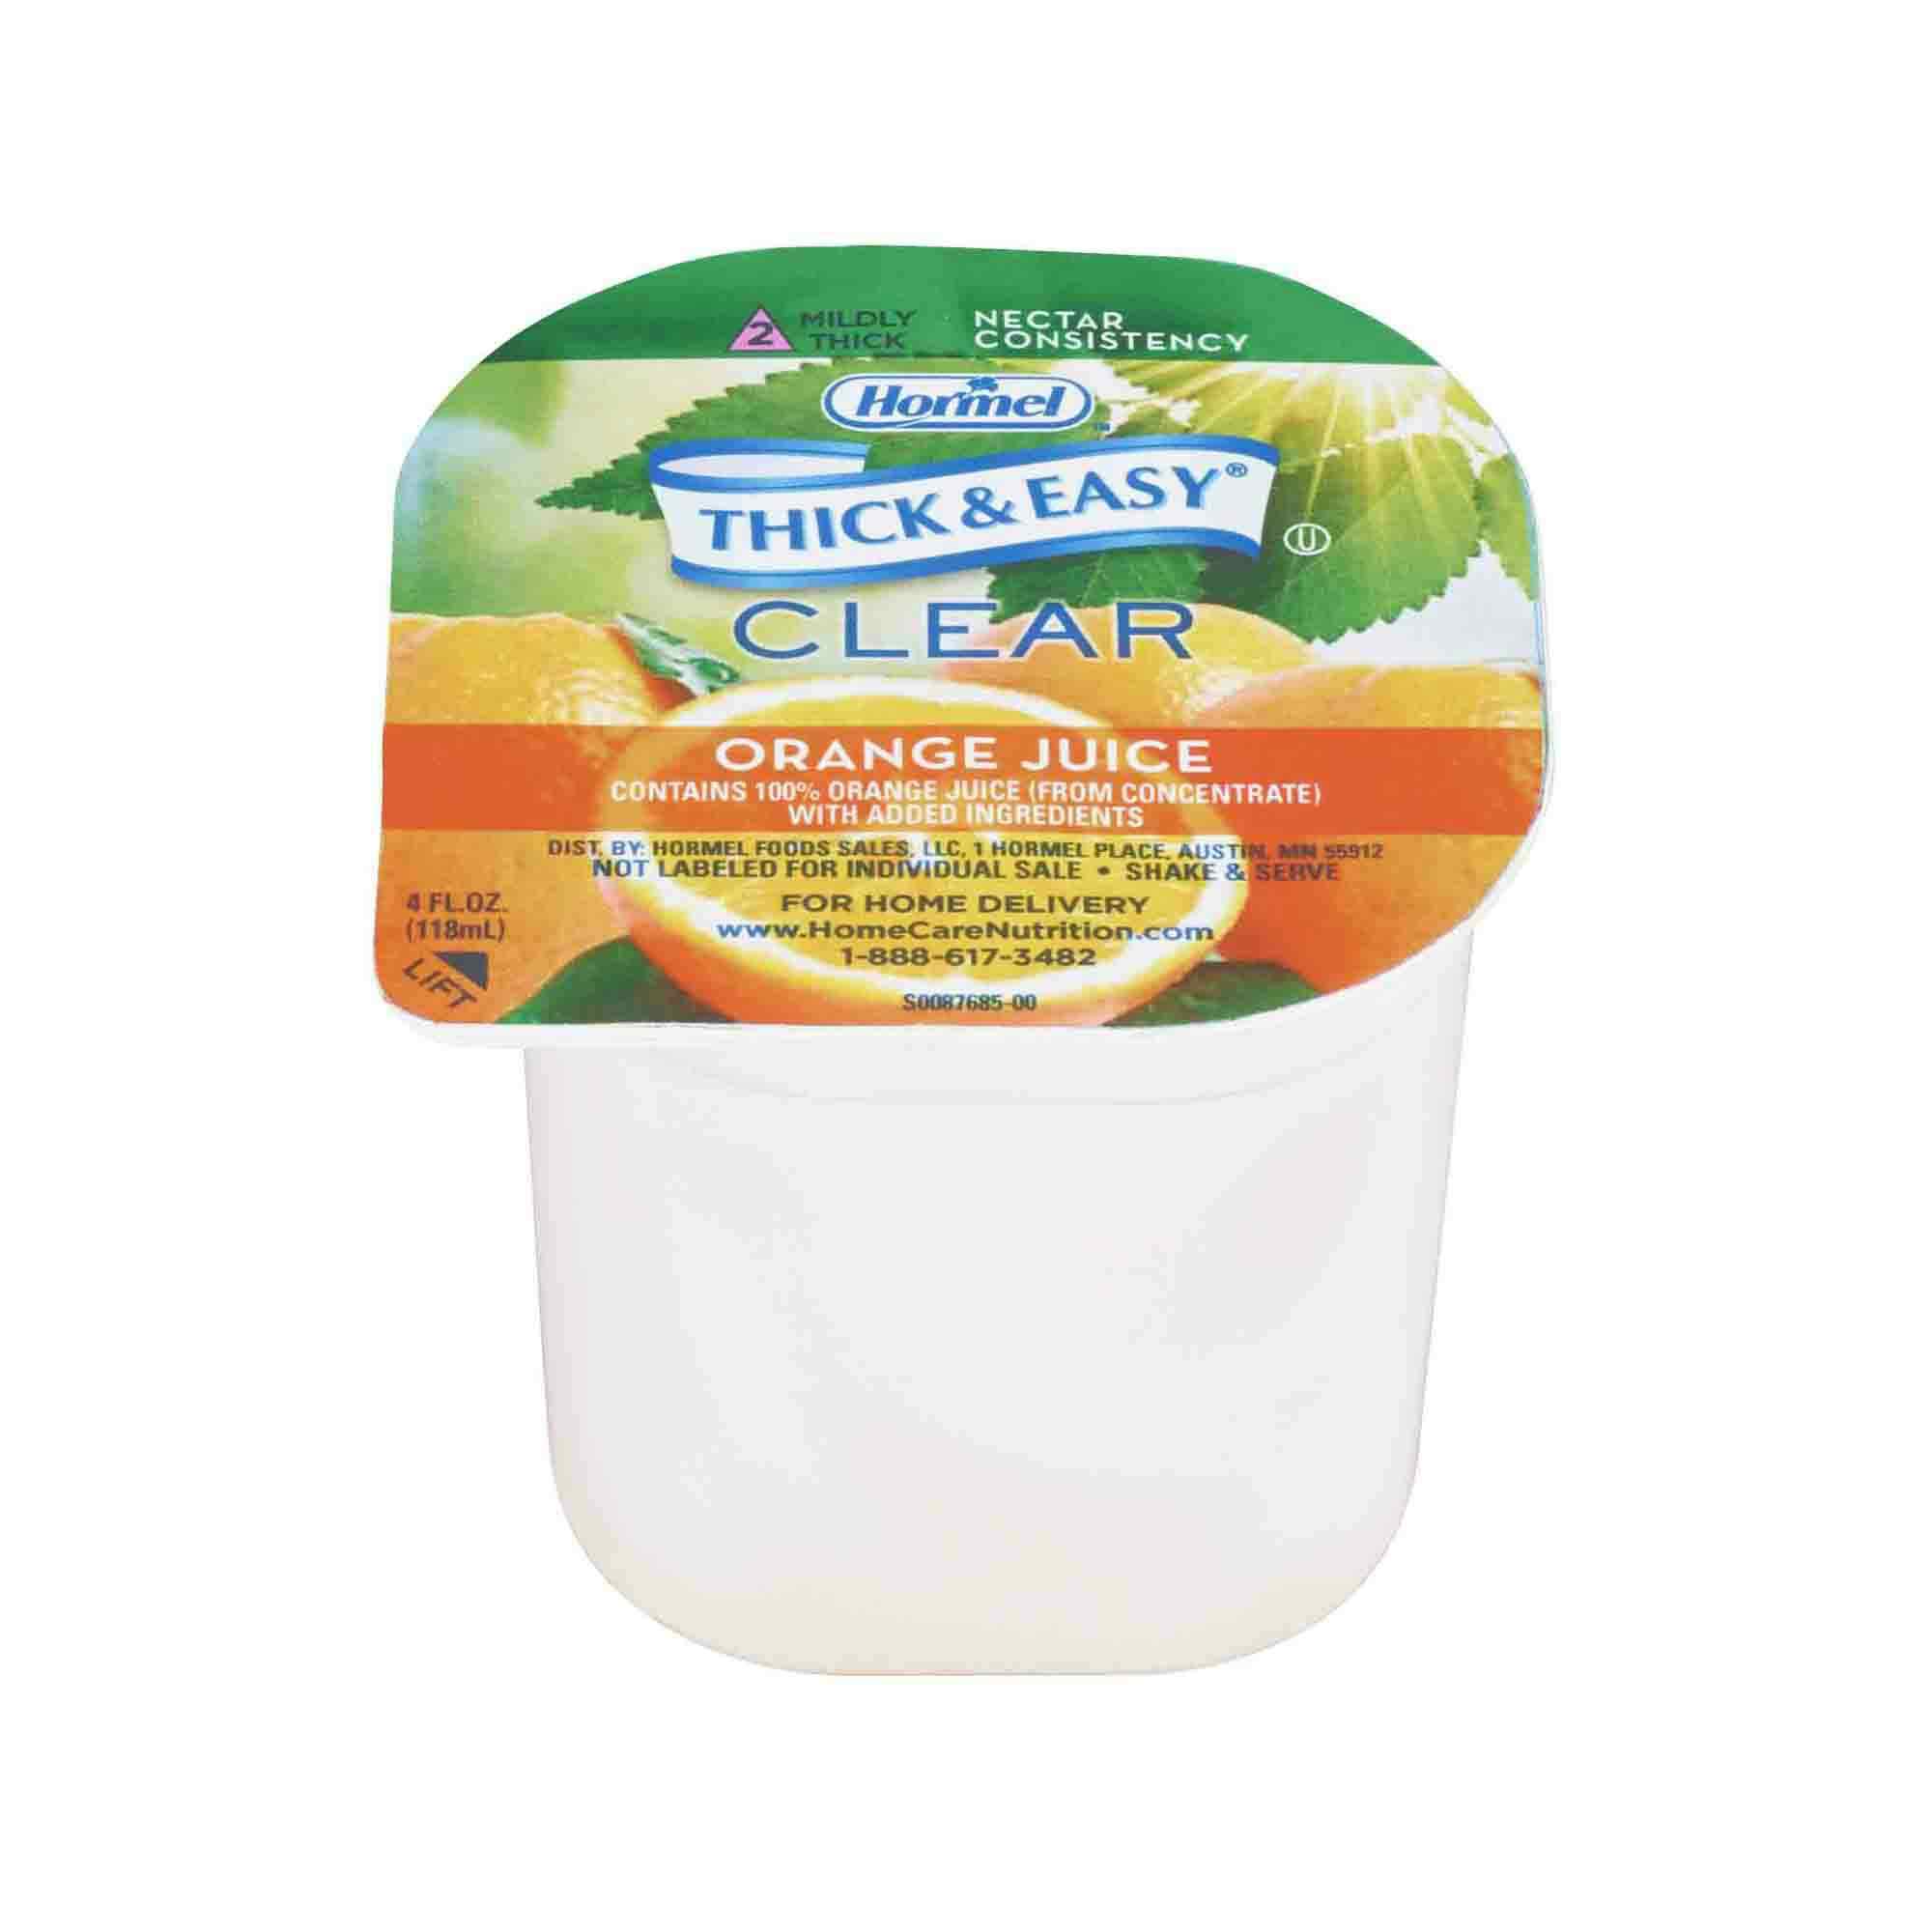 Thick & Easy Ready to Use Thickened Beverage, Orange Juice Flavor, 4 oz., Portion Cup, 49144, Case of 24 Cups